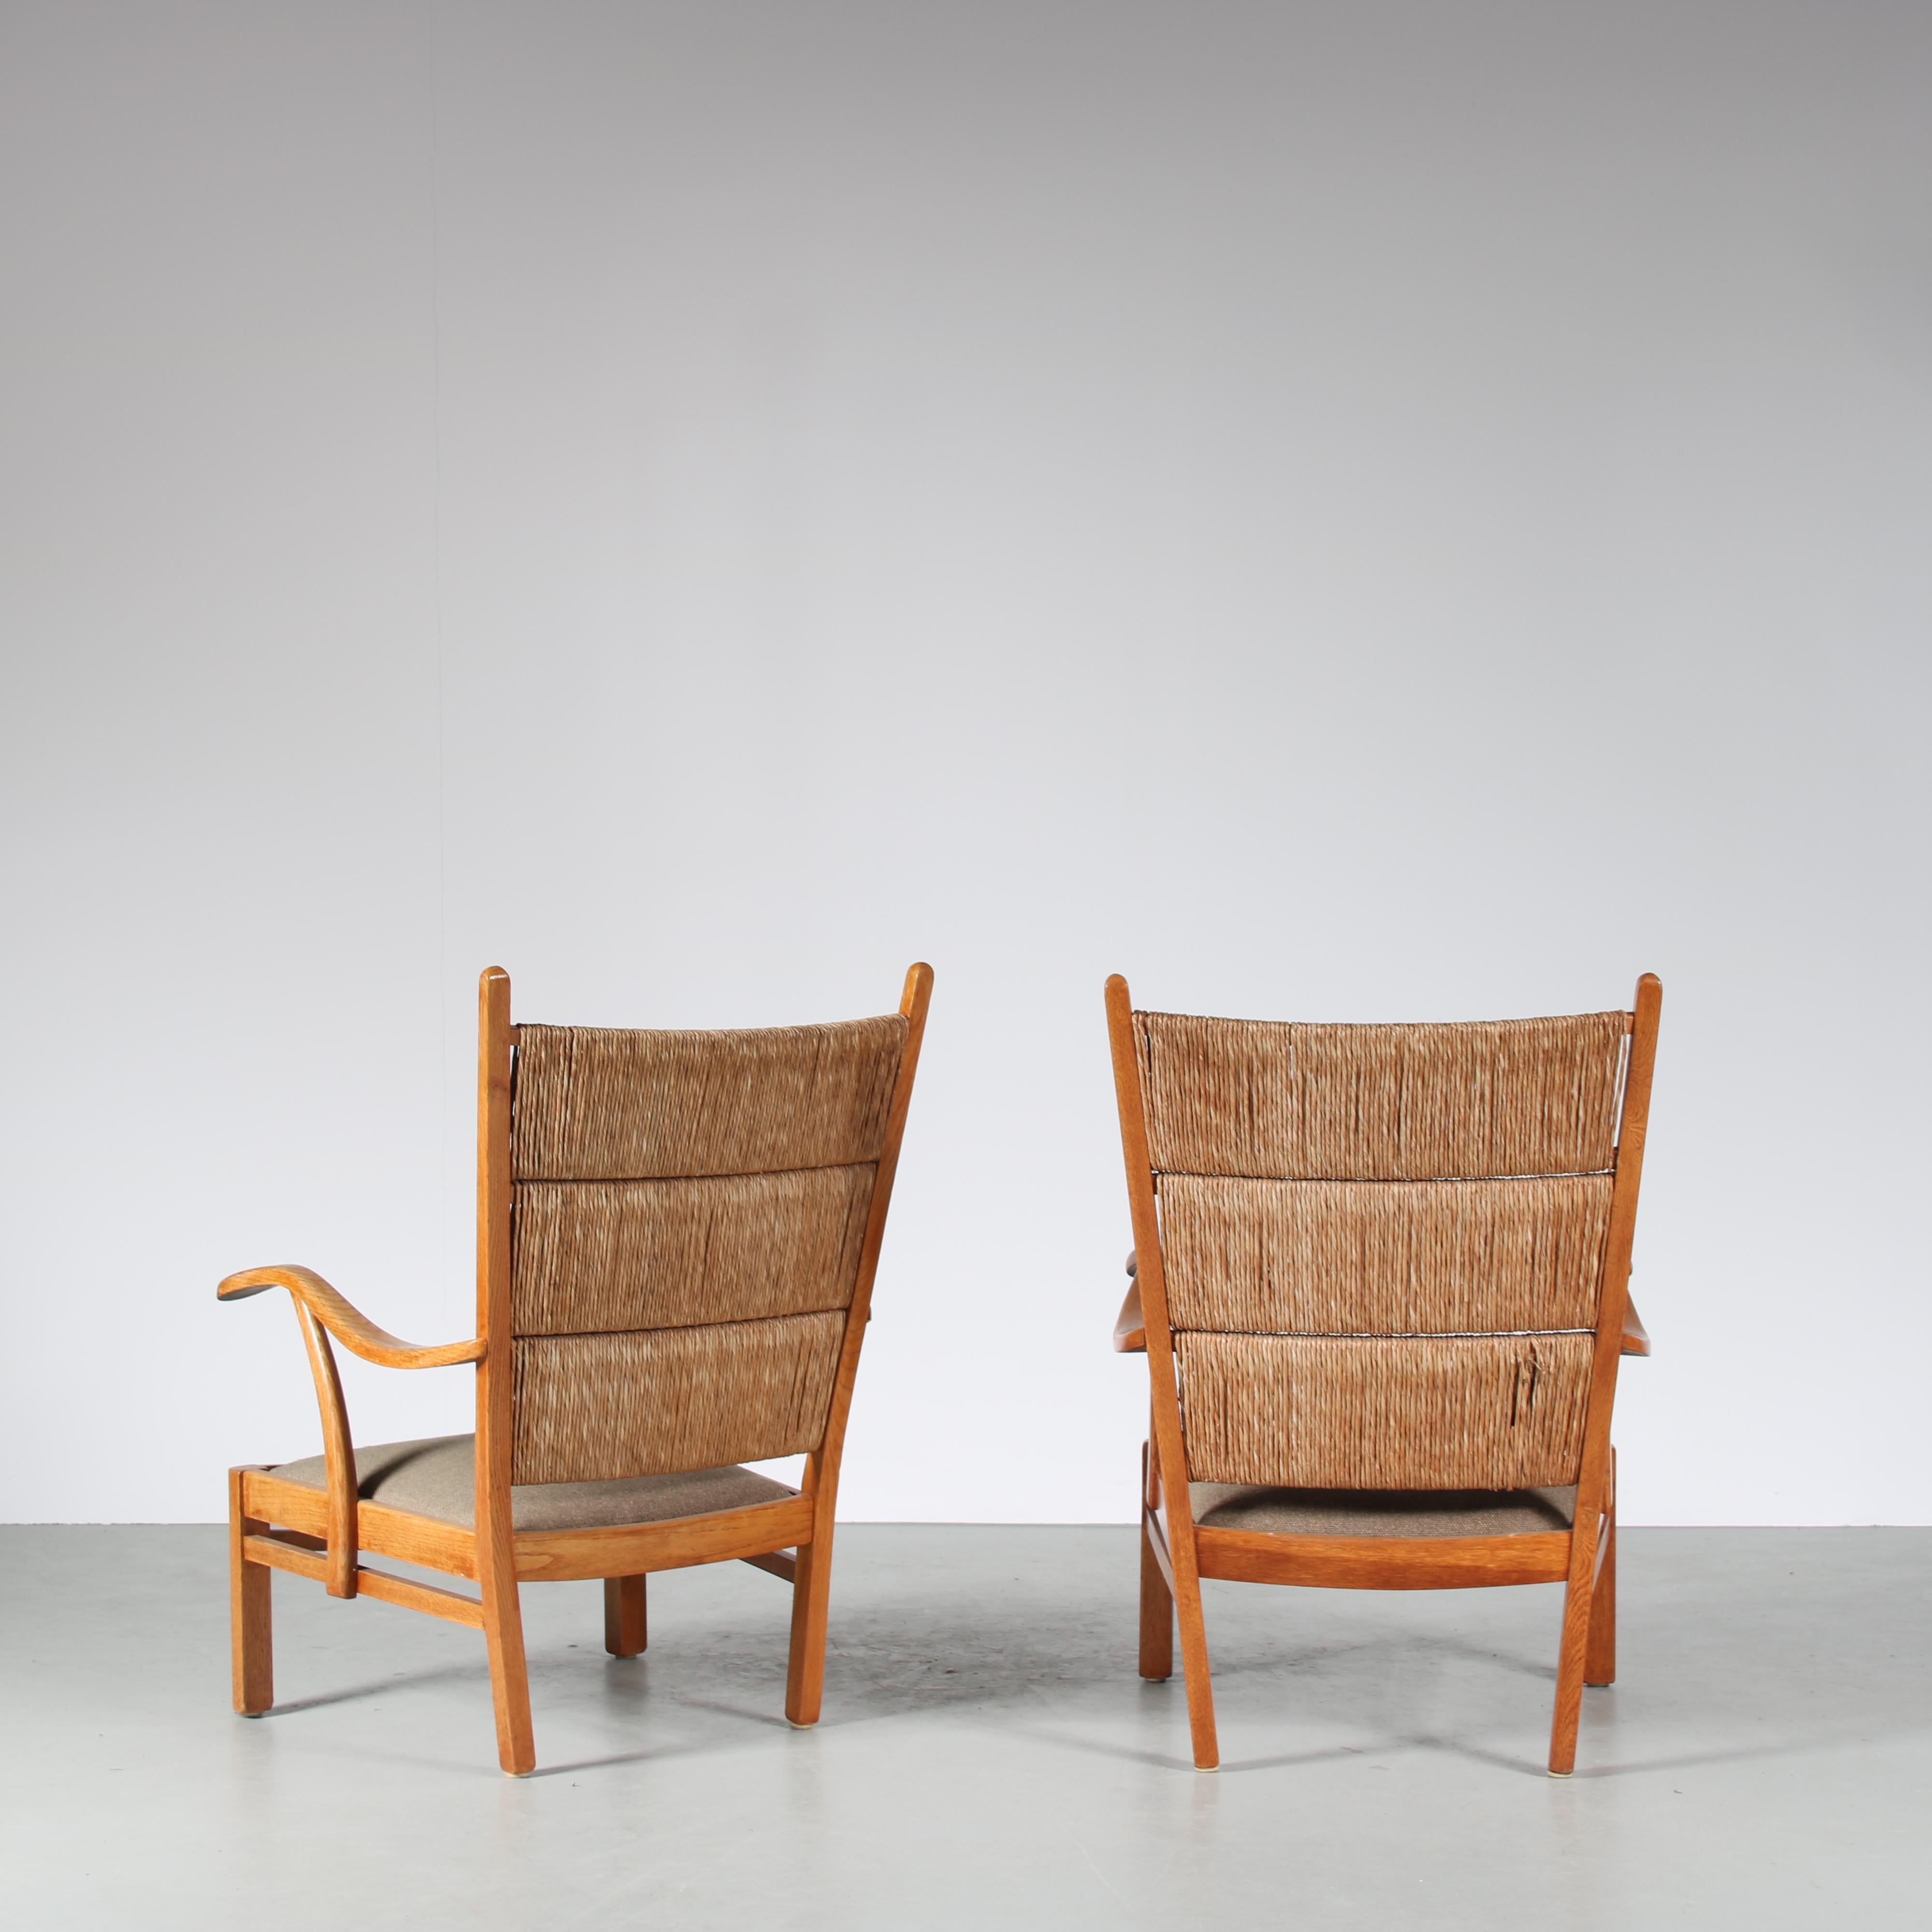 Mid-20th Century Pair of Bas Van Pelt Lounge Chairs for MyHome, Netherlands, 1950